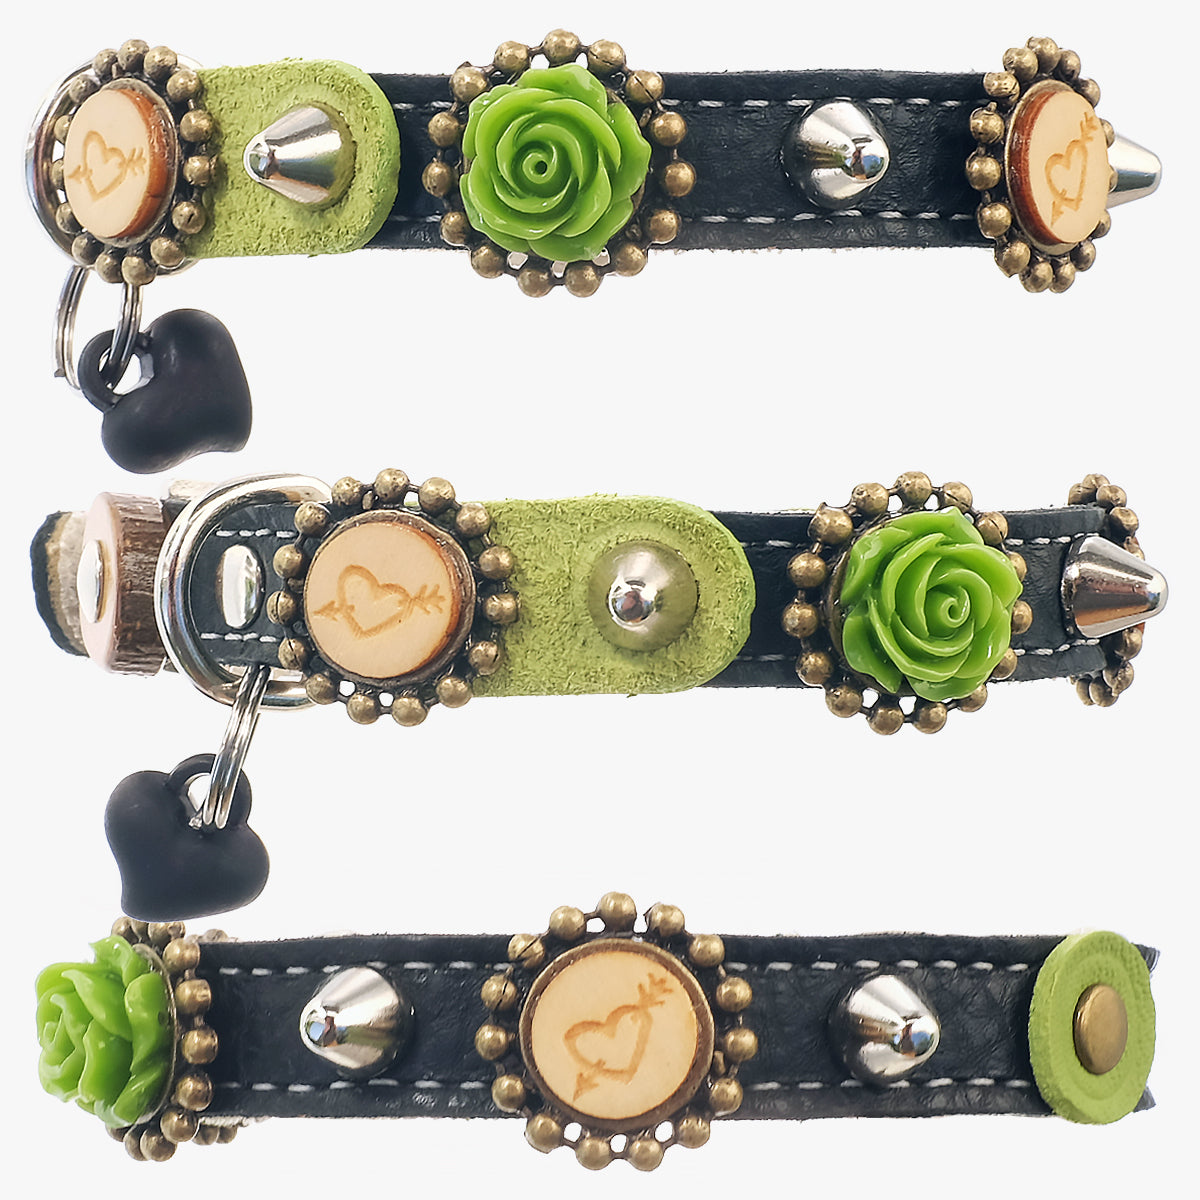 Superpipapo Leather Cat Collar, In Black With Green 3D Roses, Hearts, Patches & Wood Discs | at Made Moggie